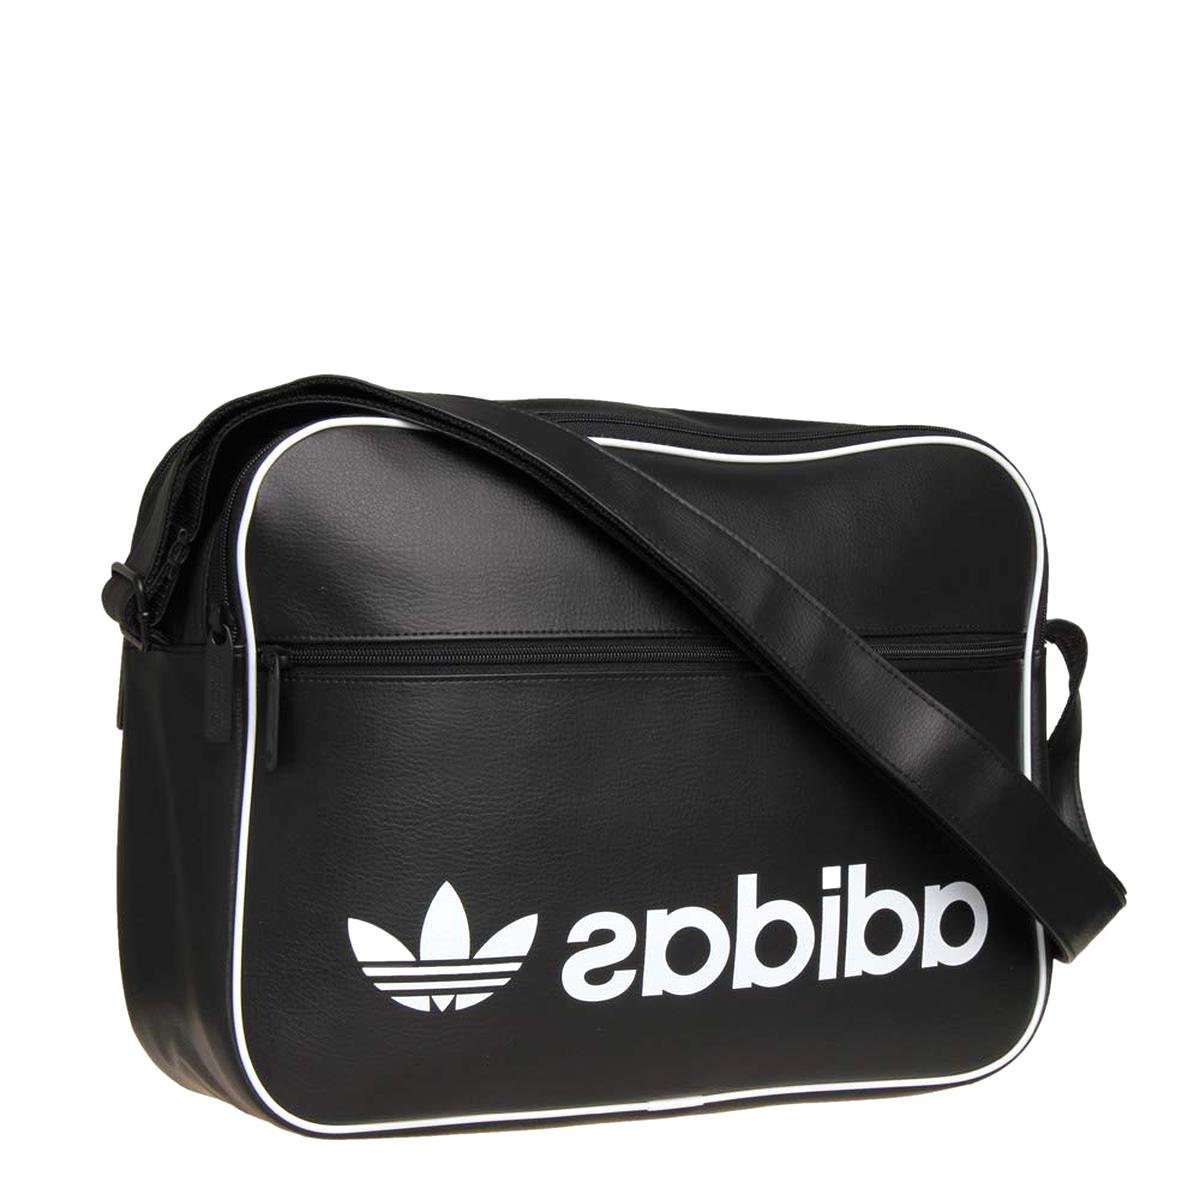 Adidas Messenger Bags for sale in UK | 57 used Adidas Messenger Bags